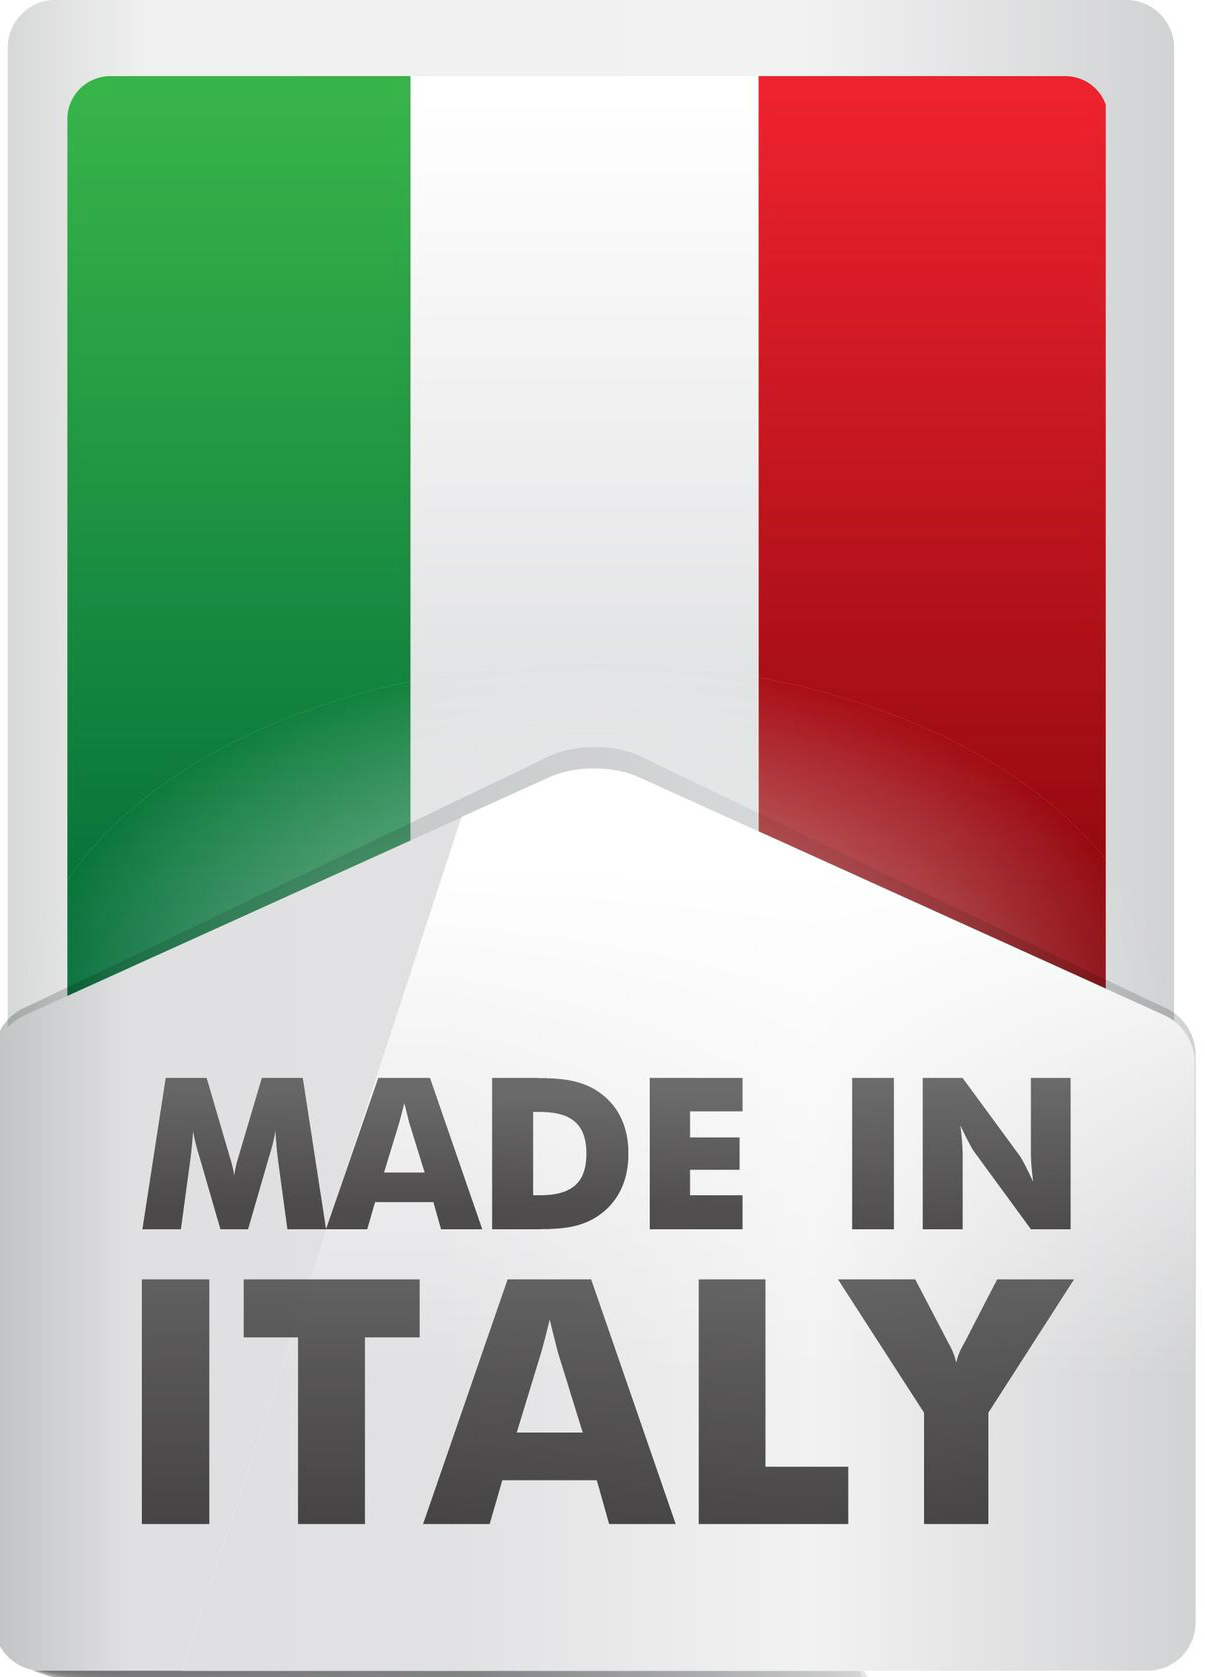 Image result for made in italy logo